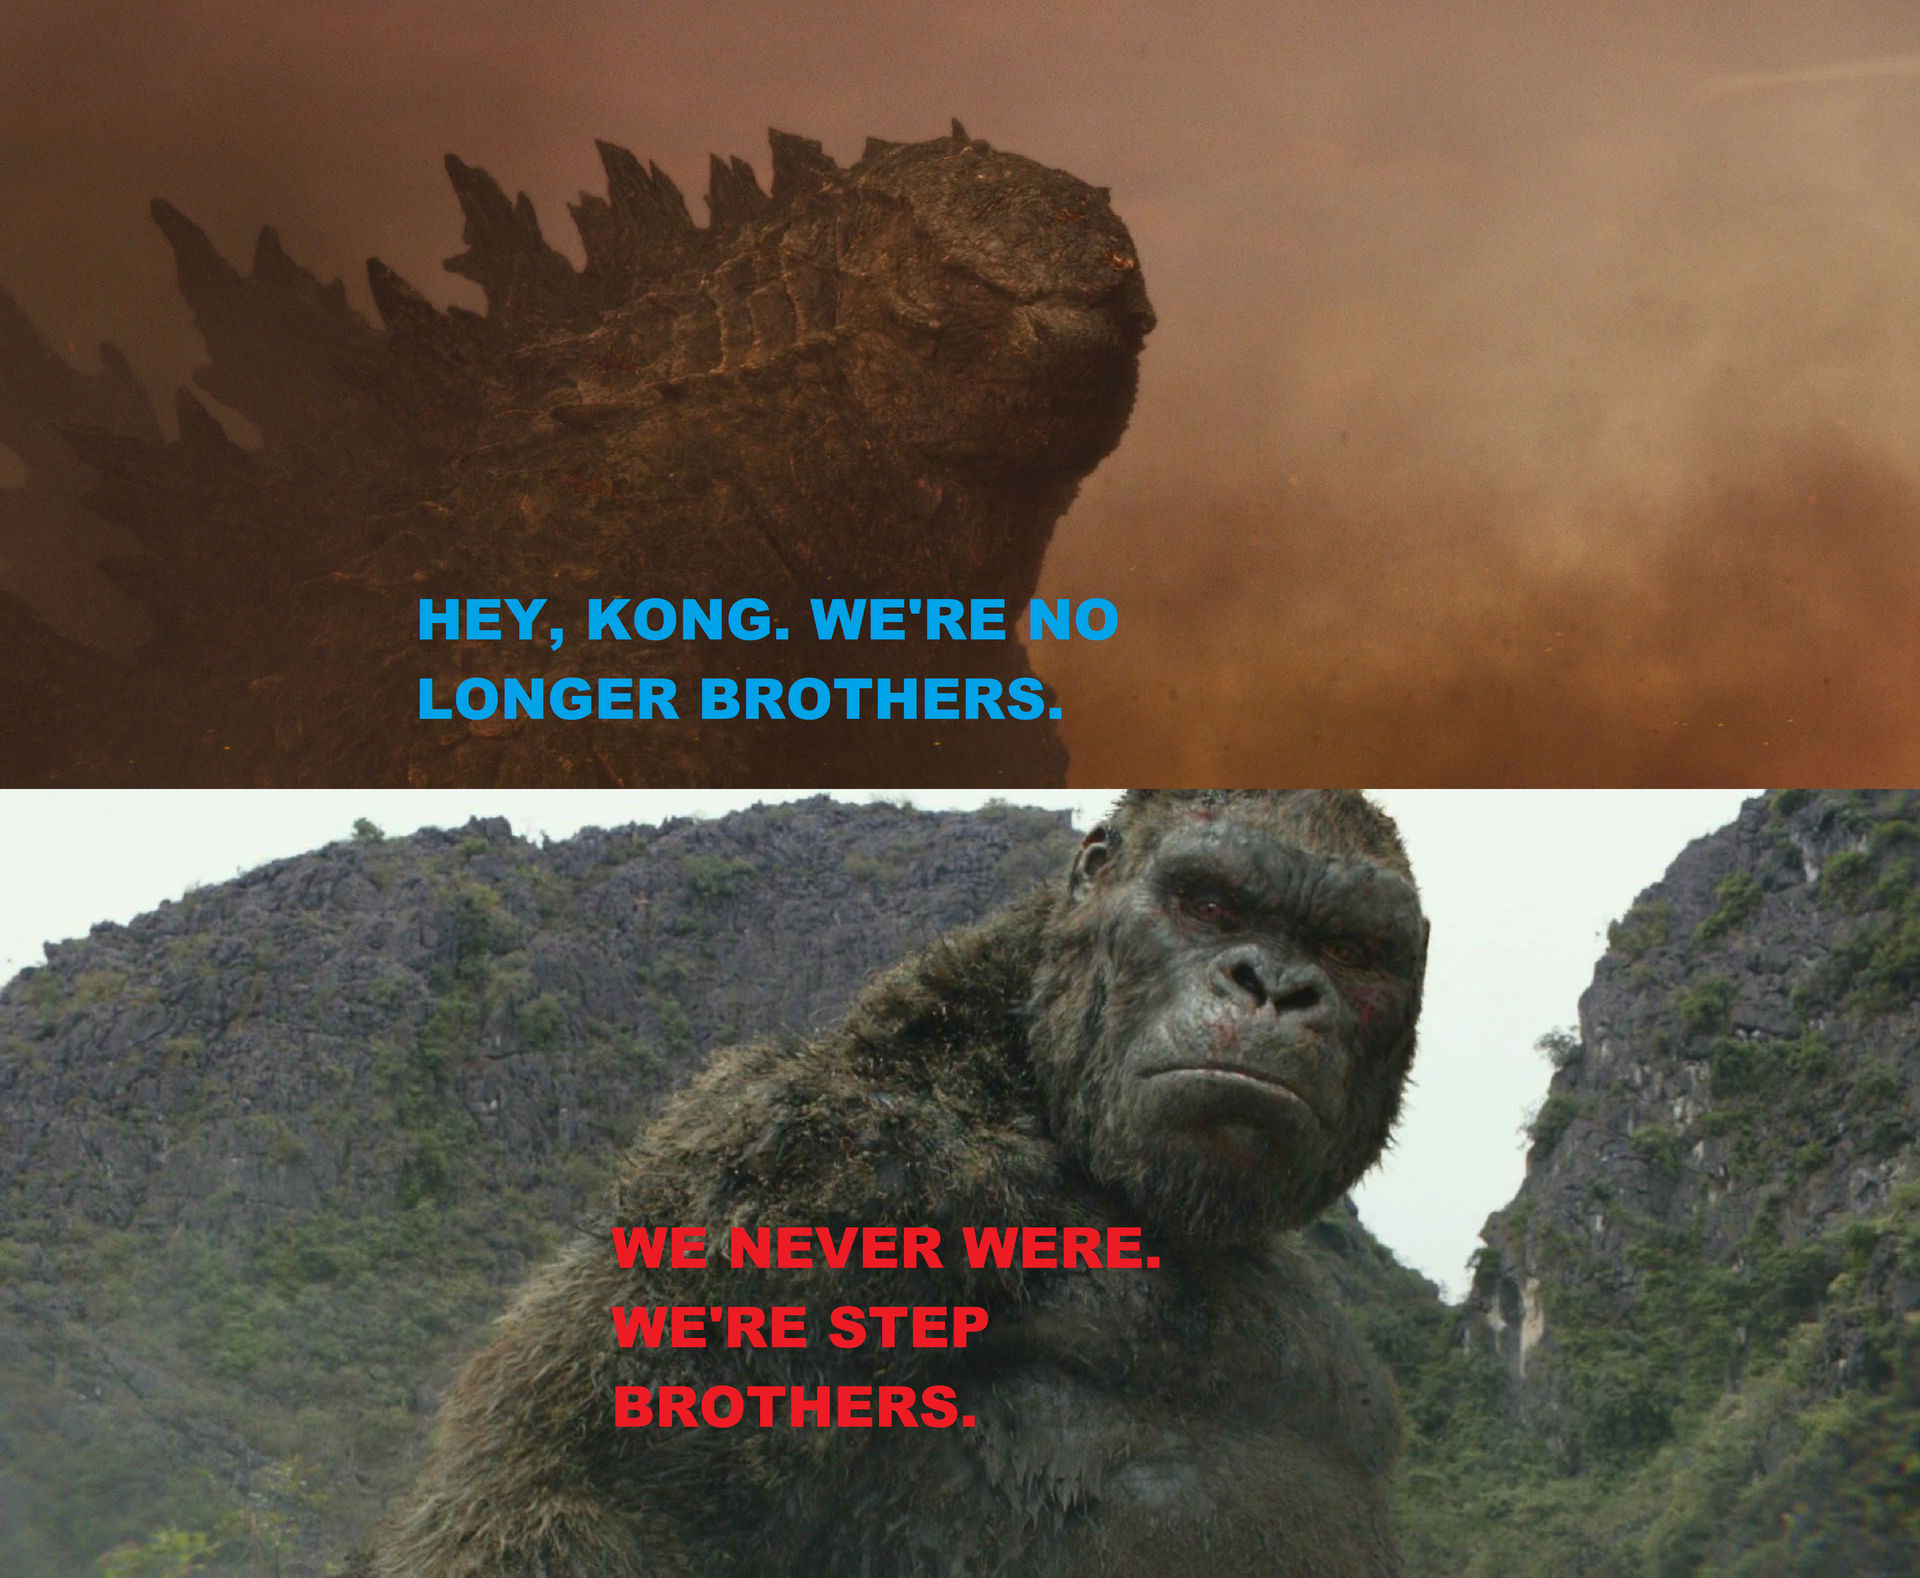 Godzilla and Kong Are Not Brothers by MnstrFrc on DeviantArt